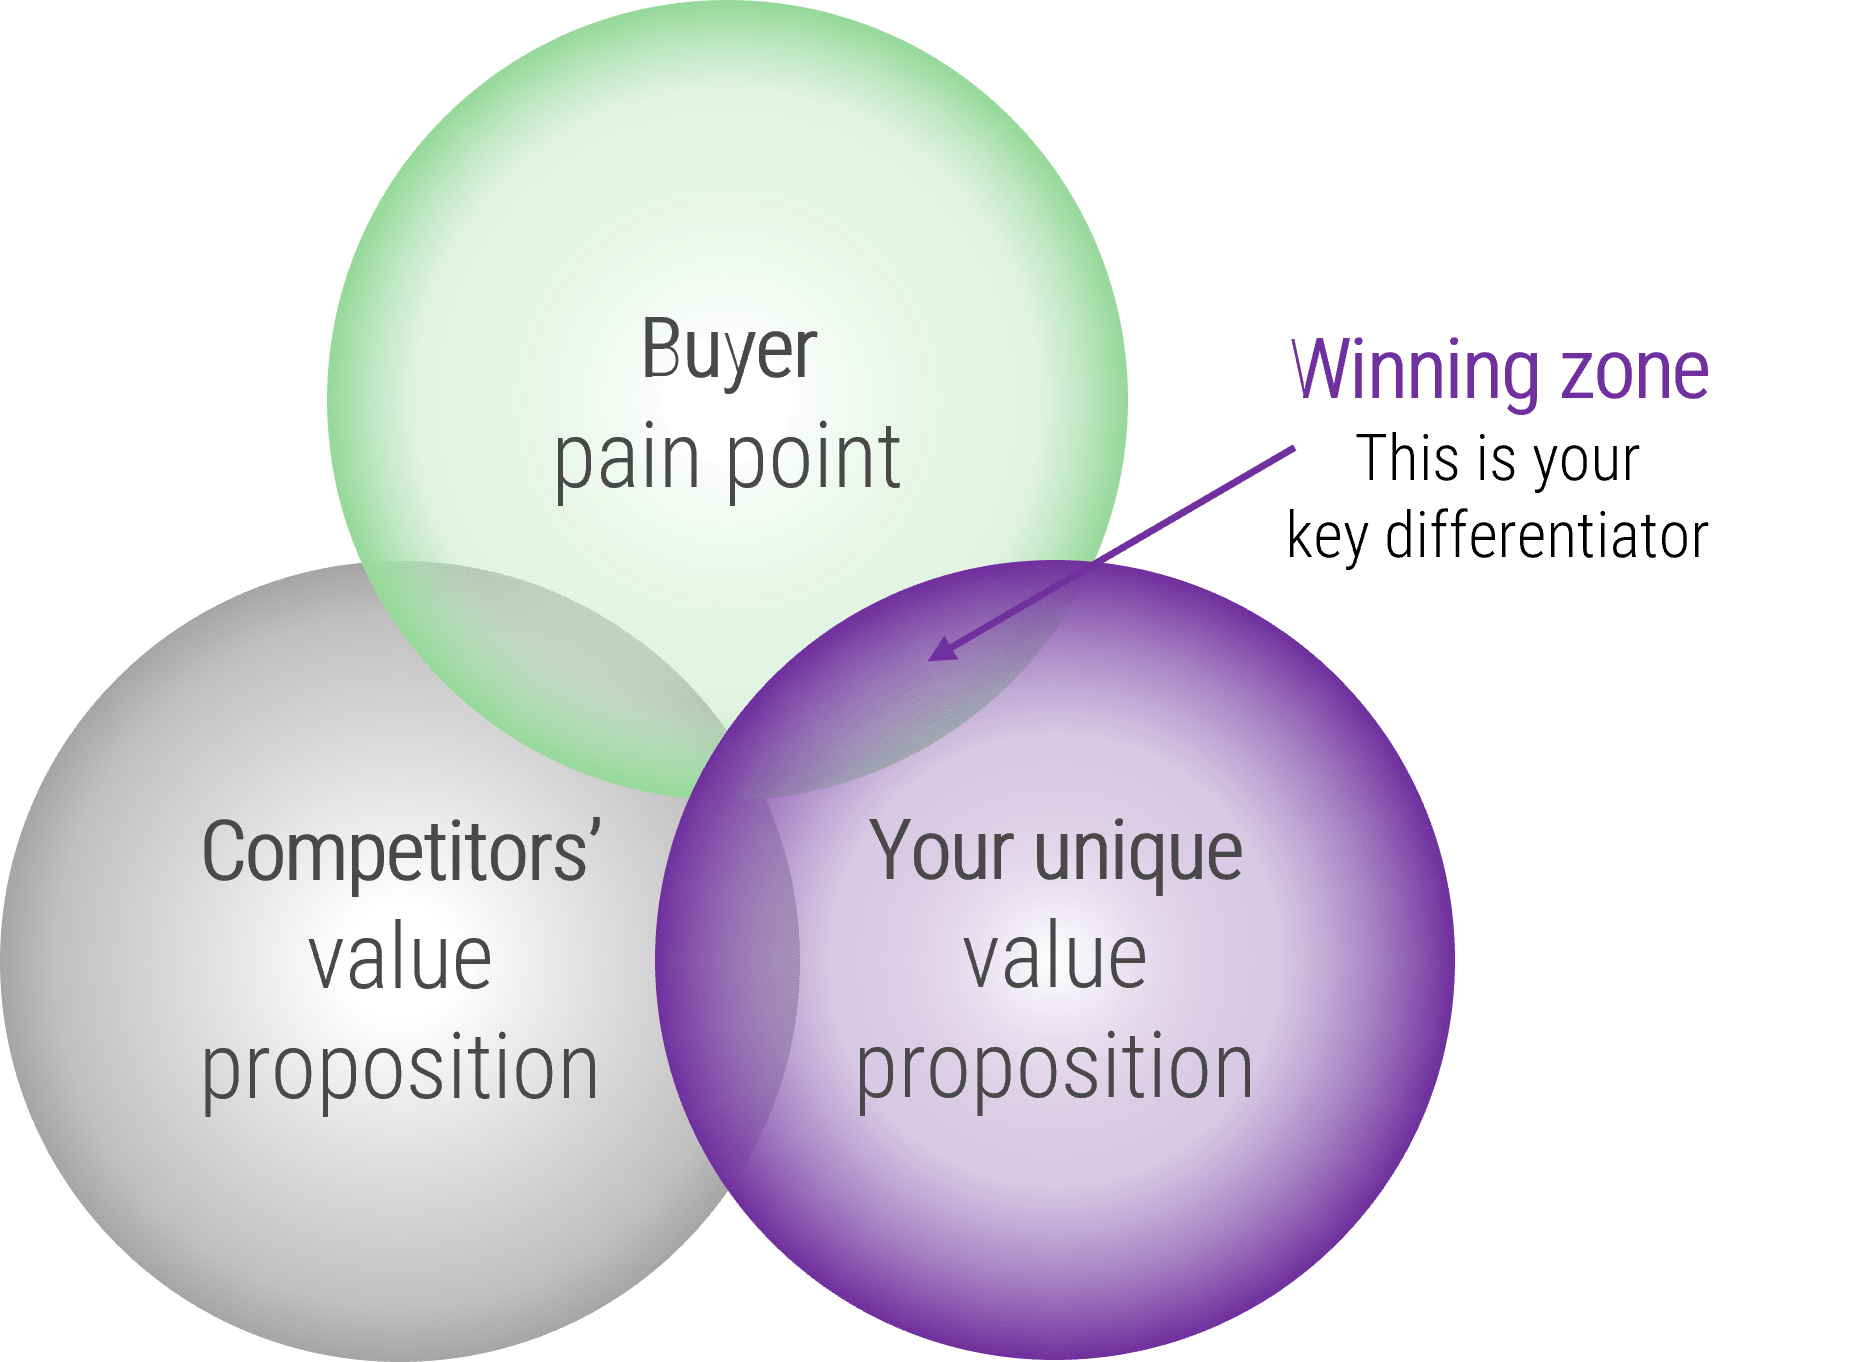 An image of a Venn diagram between the following three terms: Buyer pain point; Competitors' value proposition; your unique value proposition.  The overlapping zone is labeled the Winning zone.  This is your key differentiator.